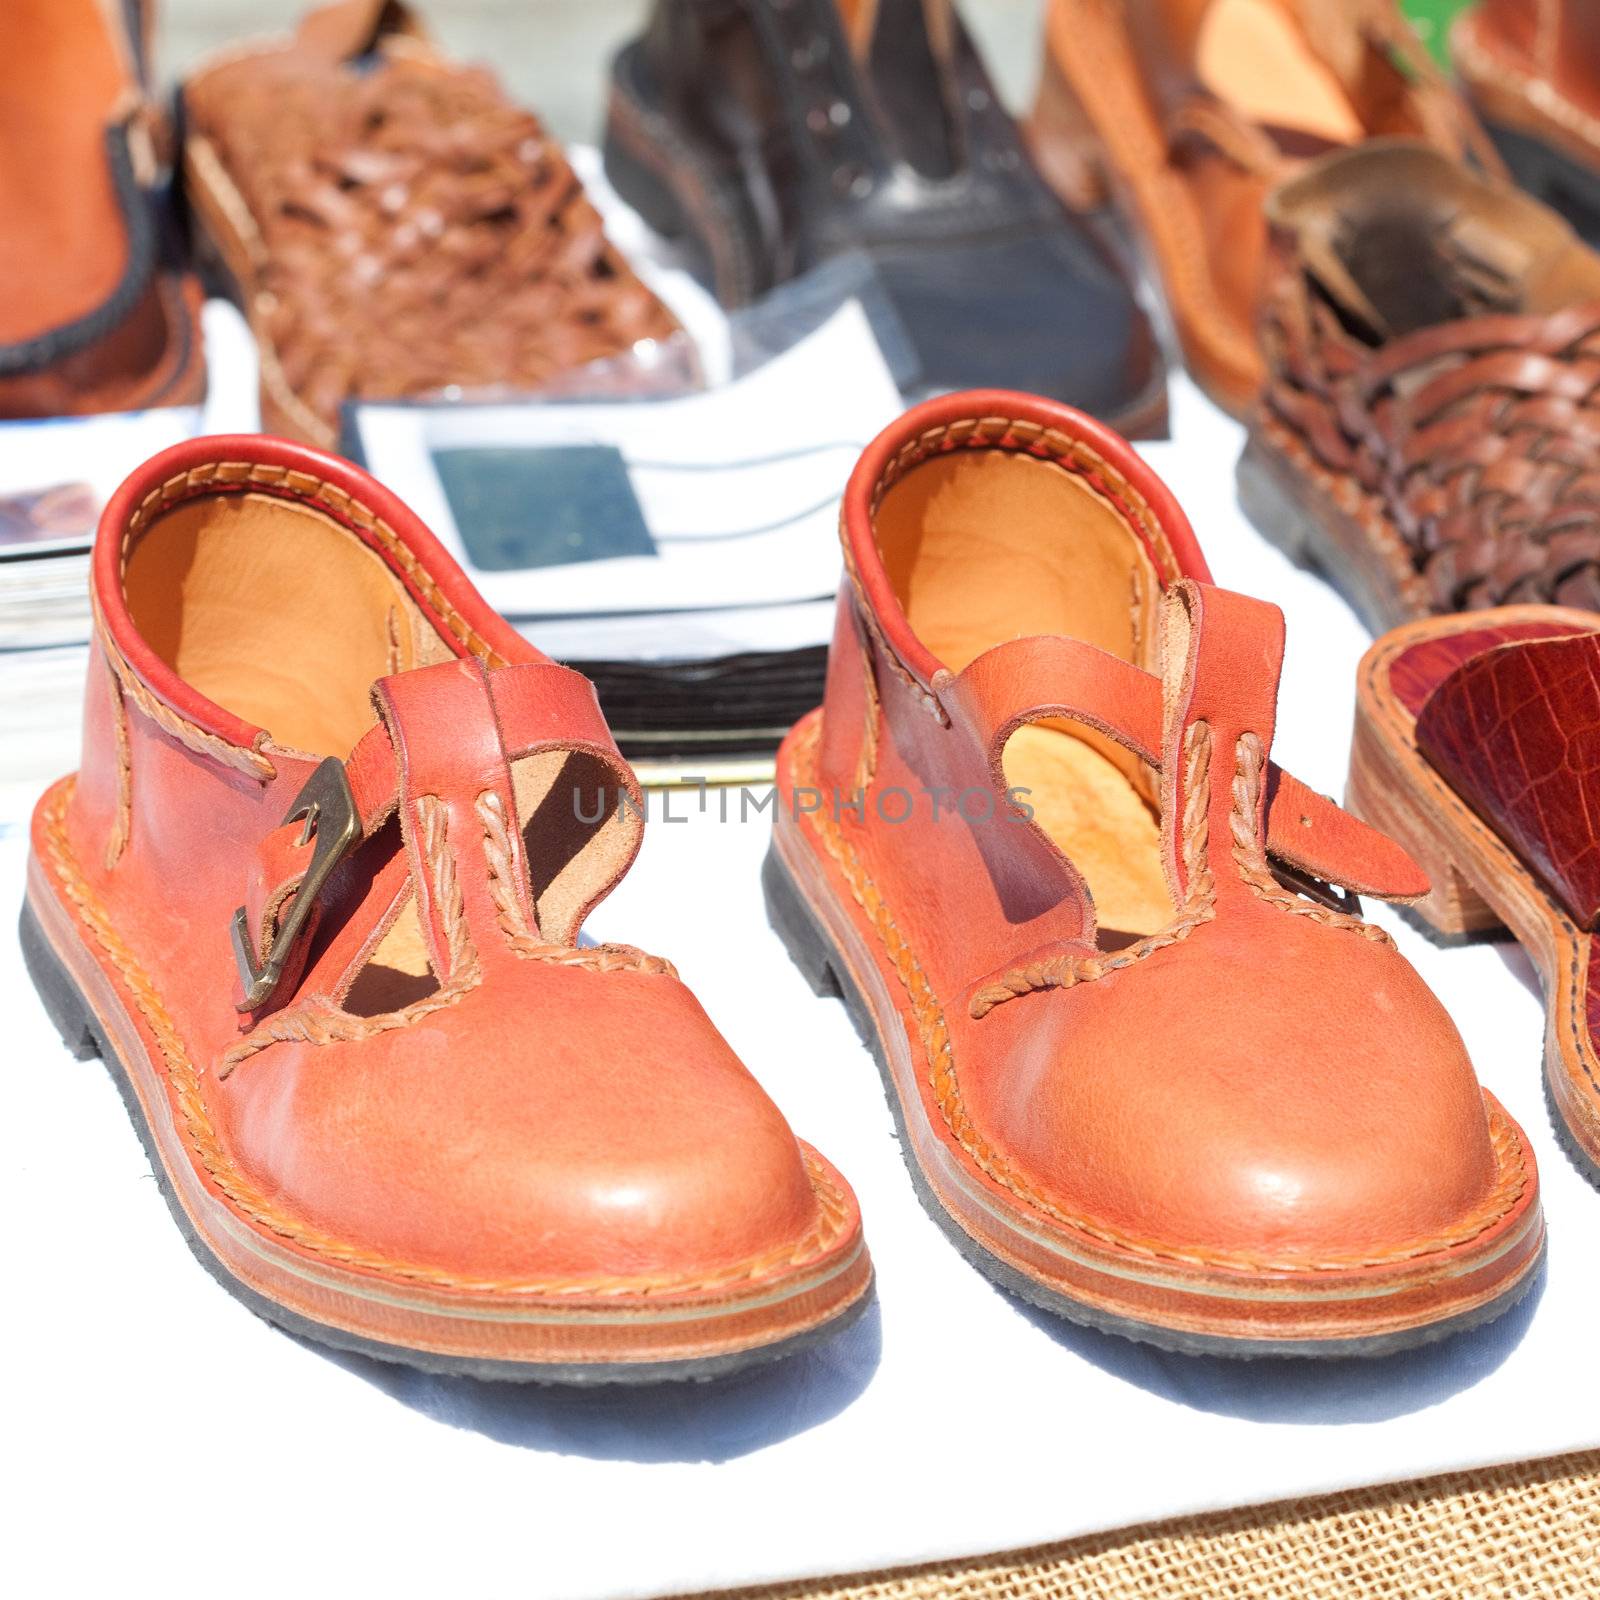 leather shoes at the fair by jannyjus